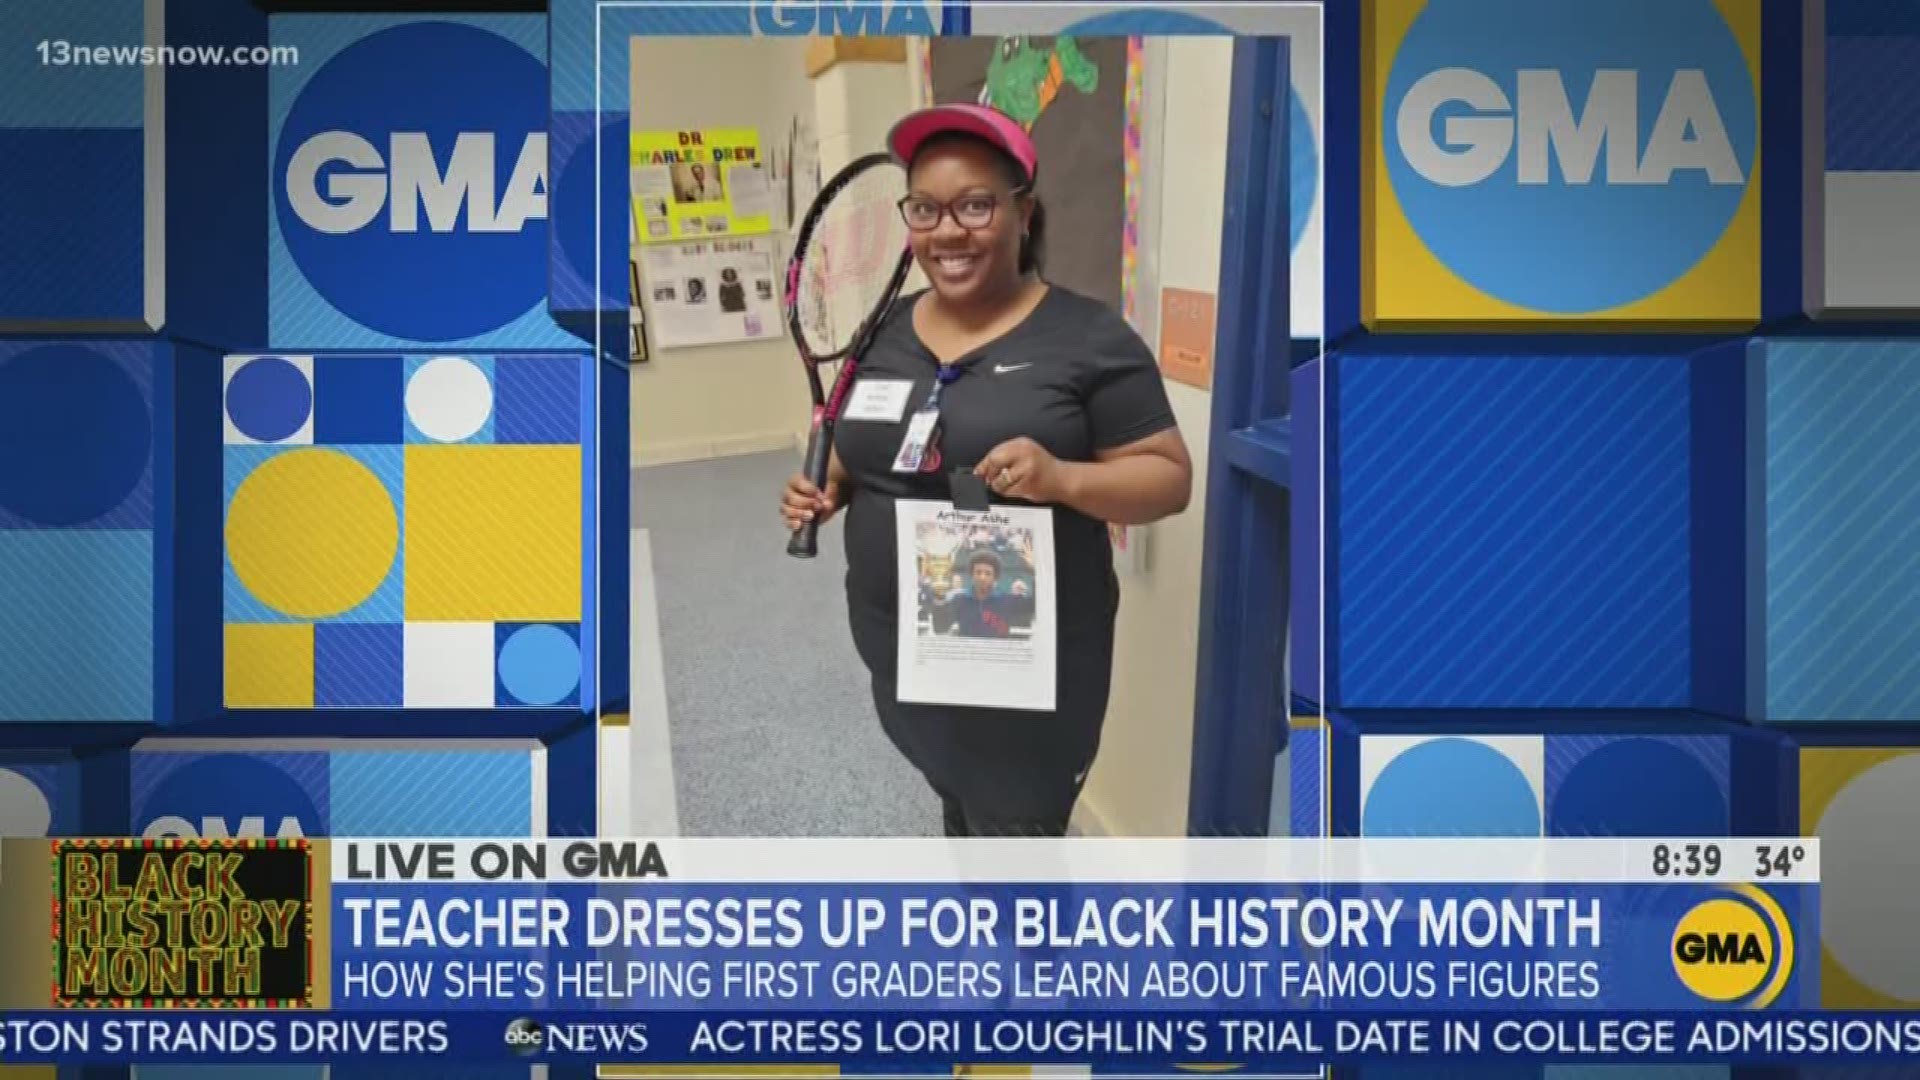 Creekside Elementary School teacher Latoya McGriff dressed up as a prominent African-American figure for each day of Black History Month.